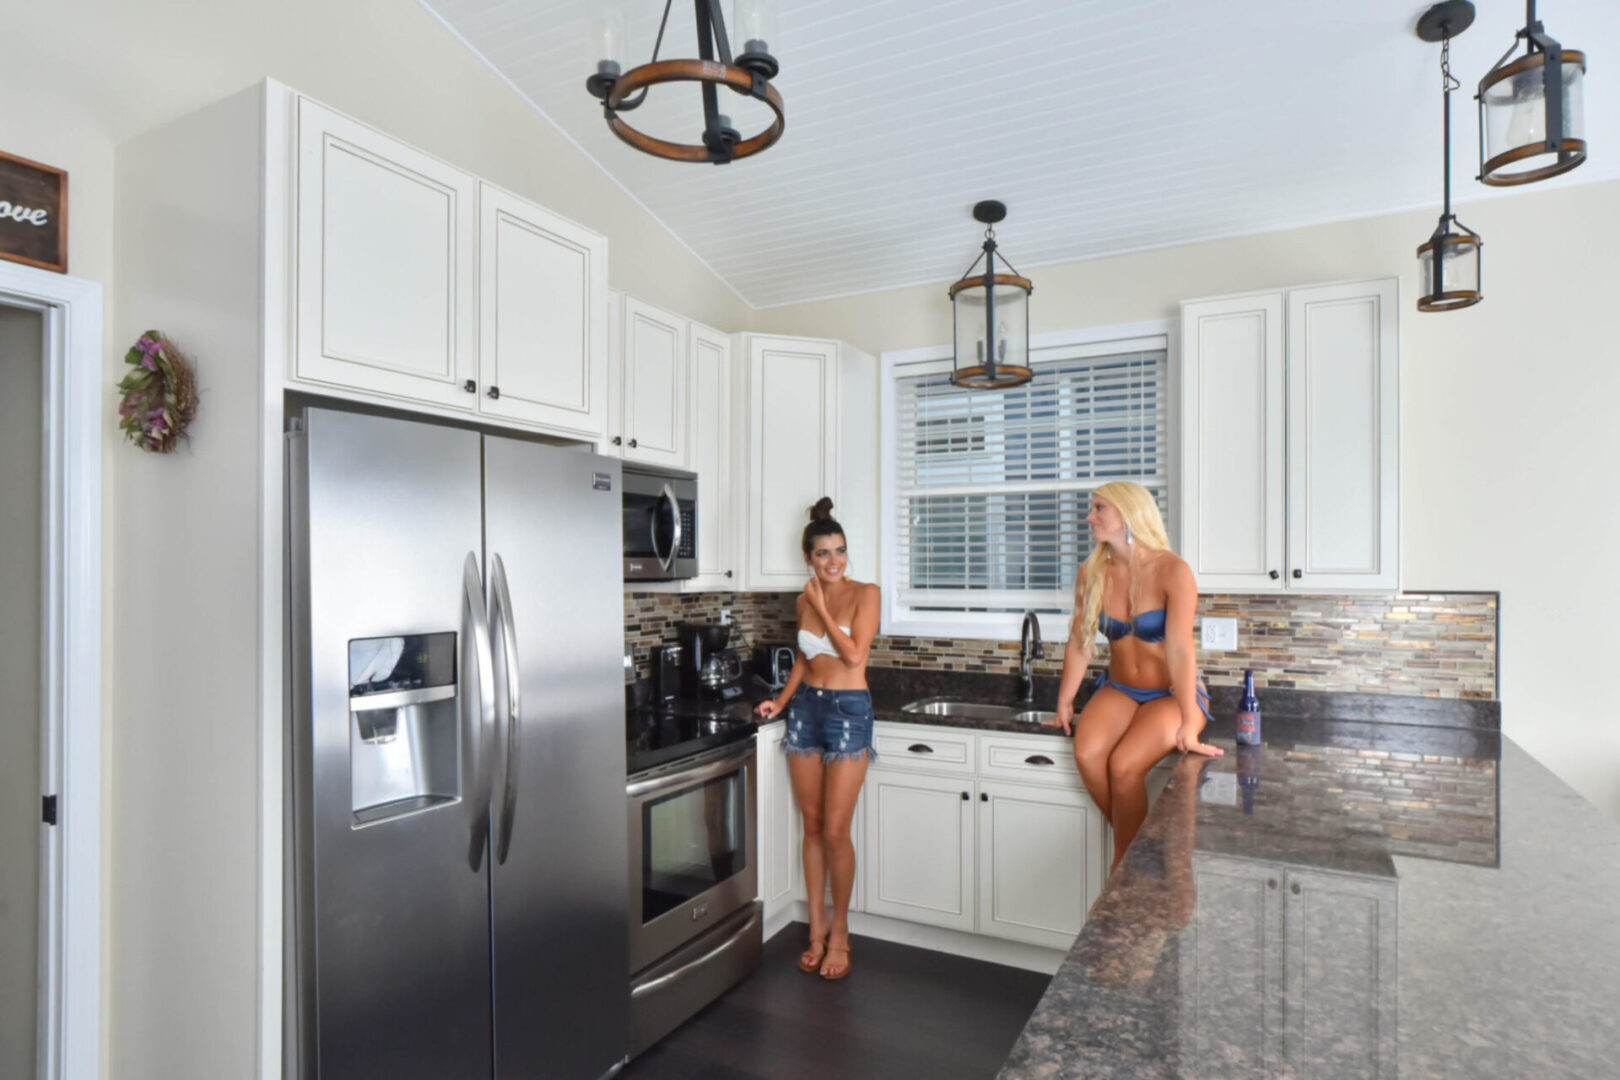 Two women in a swimsuit interacting in a white, fully equipped kitchen area with a dark brown marble counter top